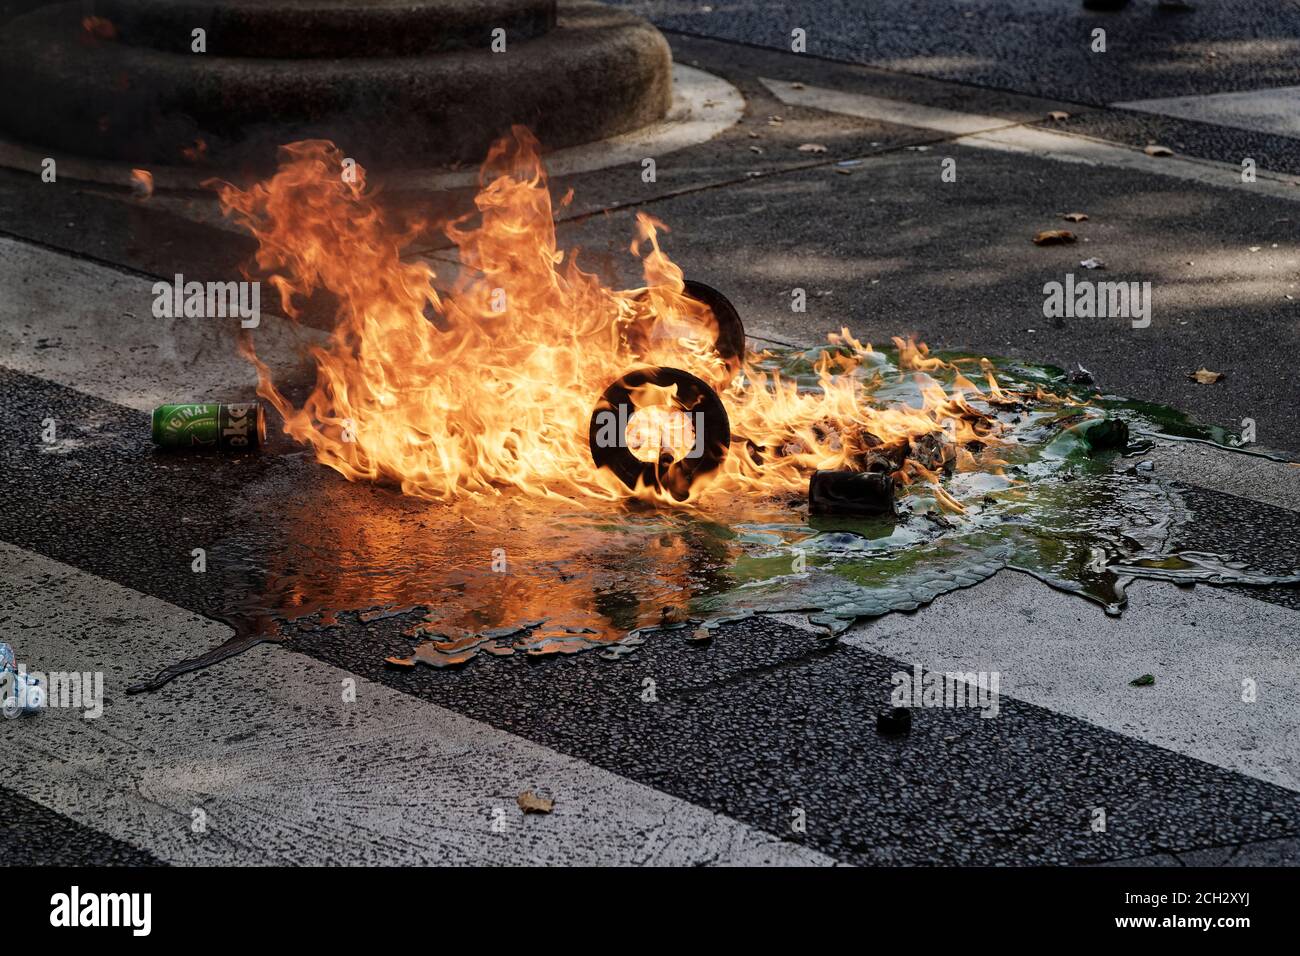 Paris, France. 12th Sept, 2020. A trash can is set on fire during the demonstration of the Yellow Vests for social and ecological justice in Paris. Stock Photo